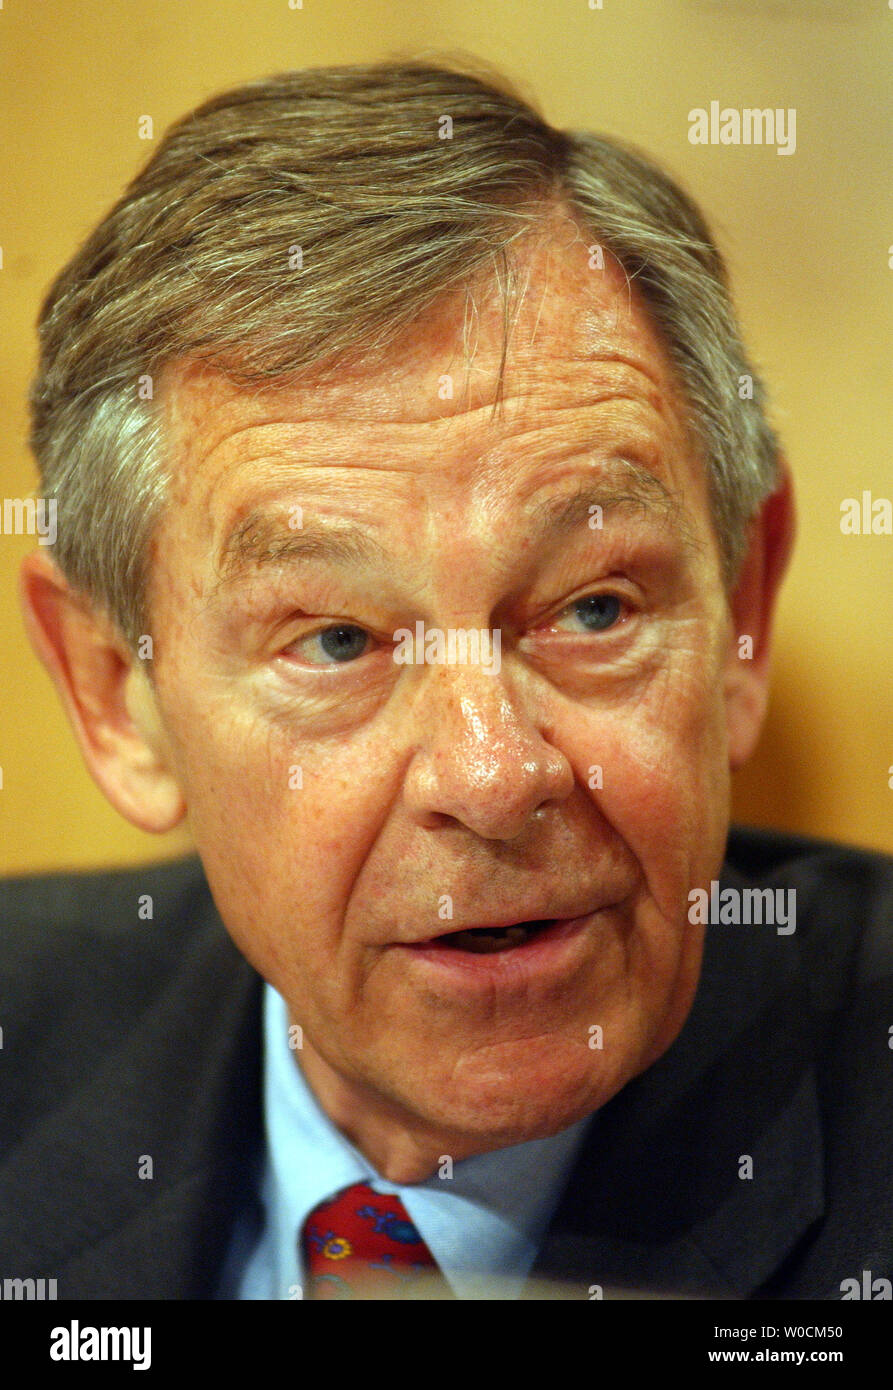 Sen. George Voinovich, R-OH, speaks during a Senate Foreign Relations Committee meeting to vote on the nomination of John Bolton to be the U.S. ambassador to the U.N. on May 12, 2005, on Capitol Hill in Washington. Voinovich continues to oppose the nomination despite pressure from his party to support the President's choice.     (UPI Photo/Roger L. Wollenberg) Stock Photo